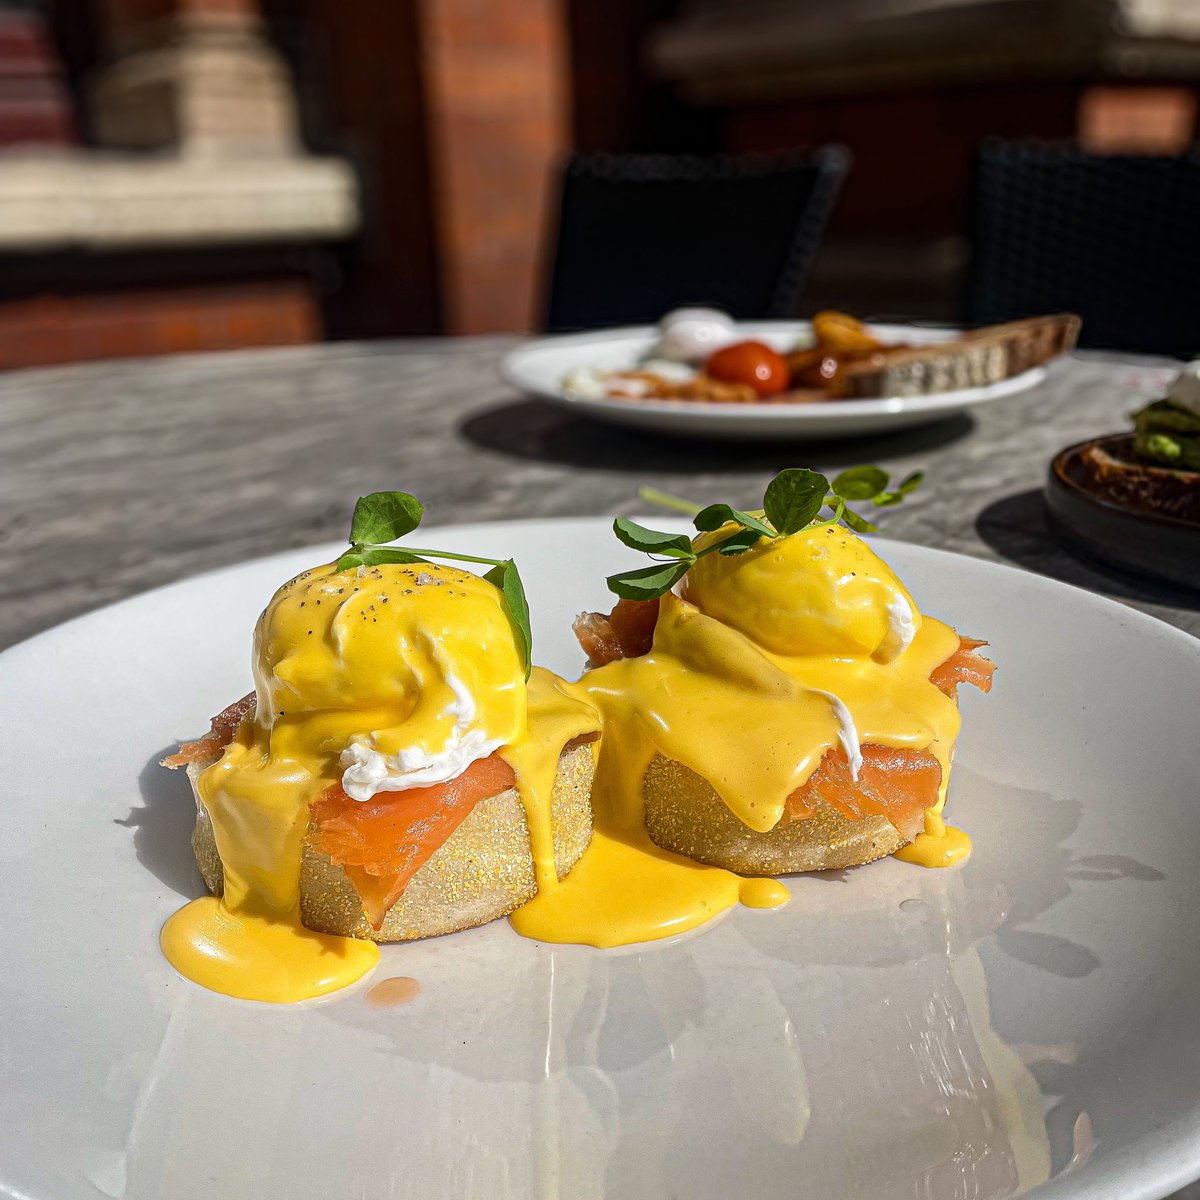 A new week deserves to be started with the best of breakfast 🍳🥓 serving up delicious dishes from 8am every day … start your week right with us 🥑

#youngspubs #youngspublife #youngspubspeople #breakfast #eggsroyale #londonpubs #londonrestaurants